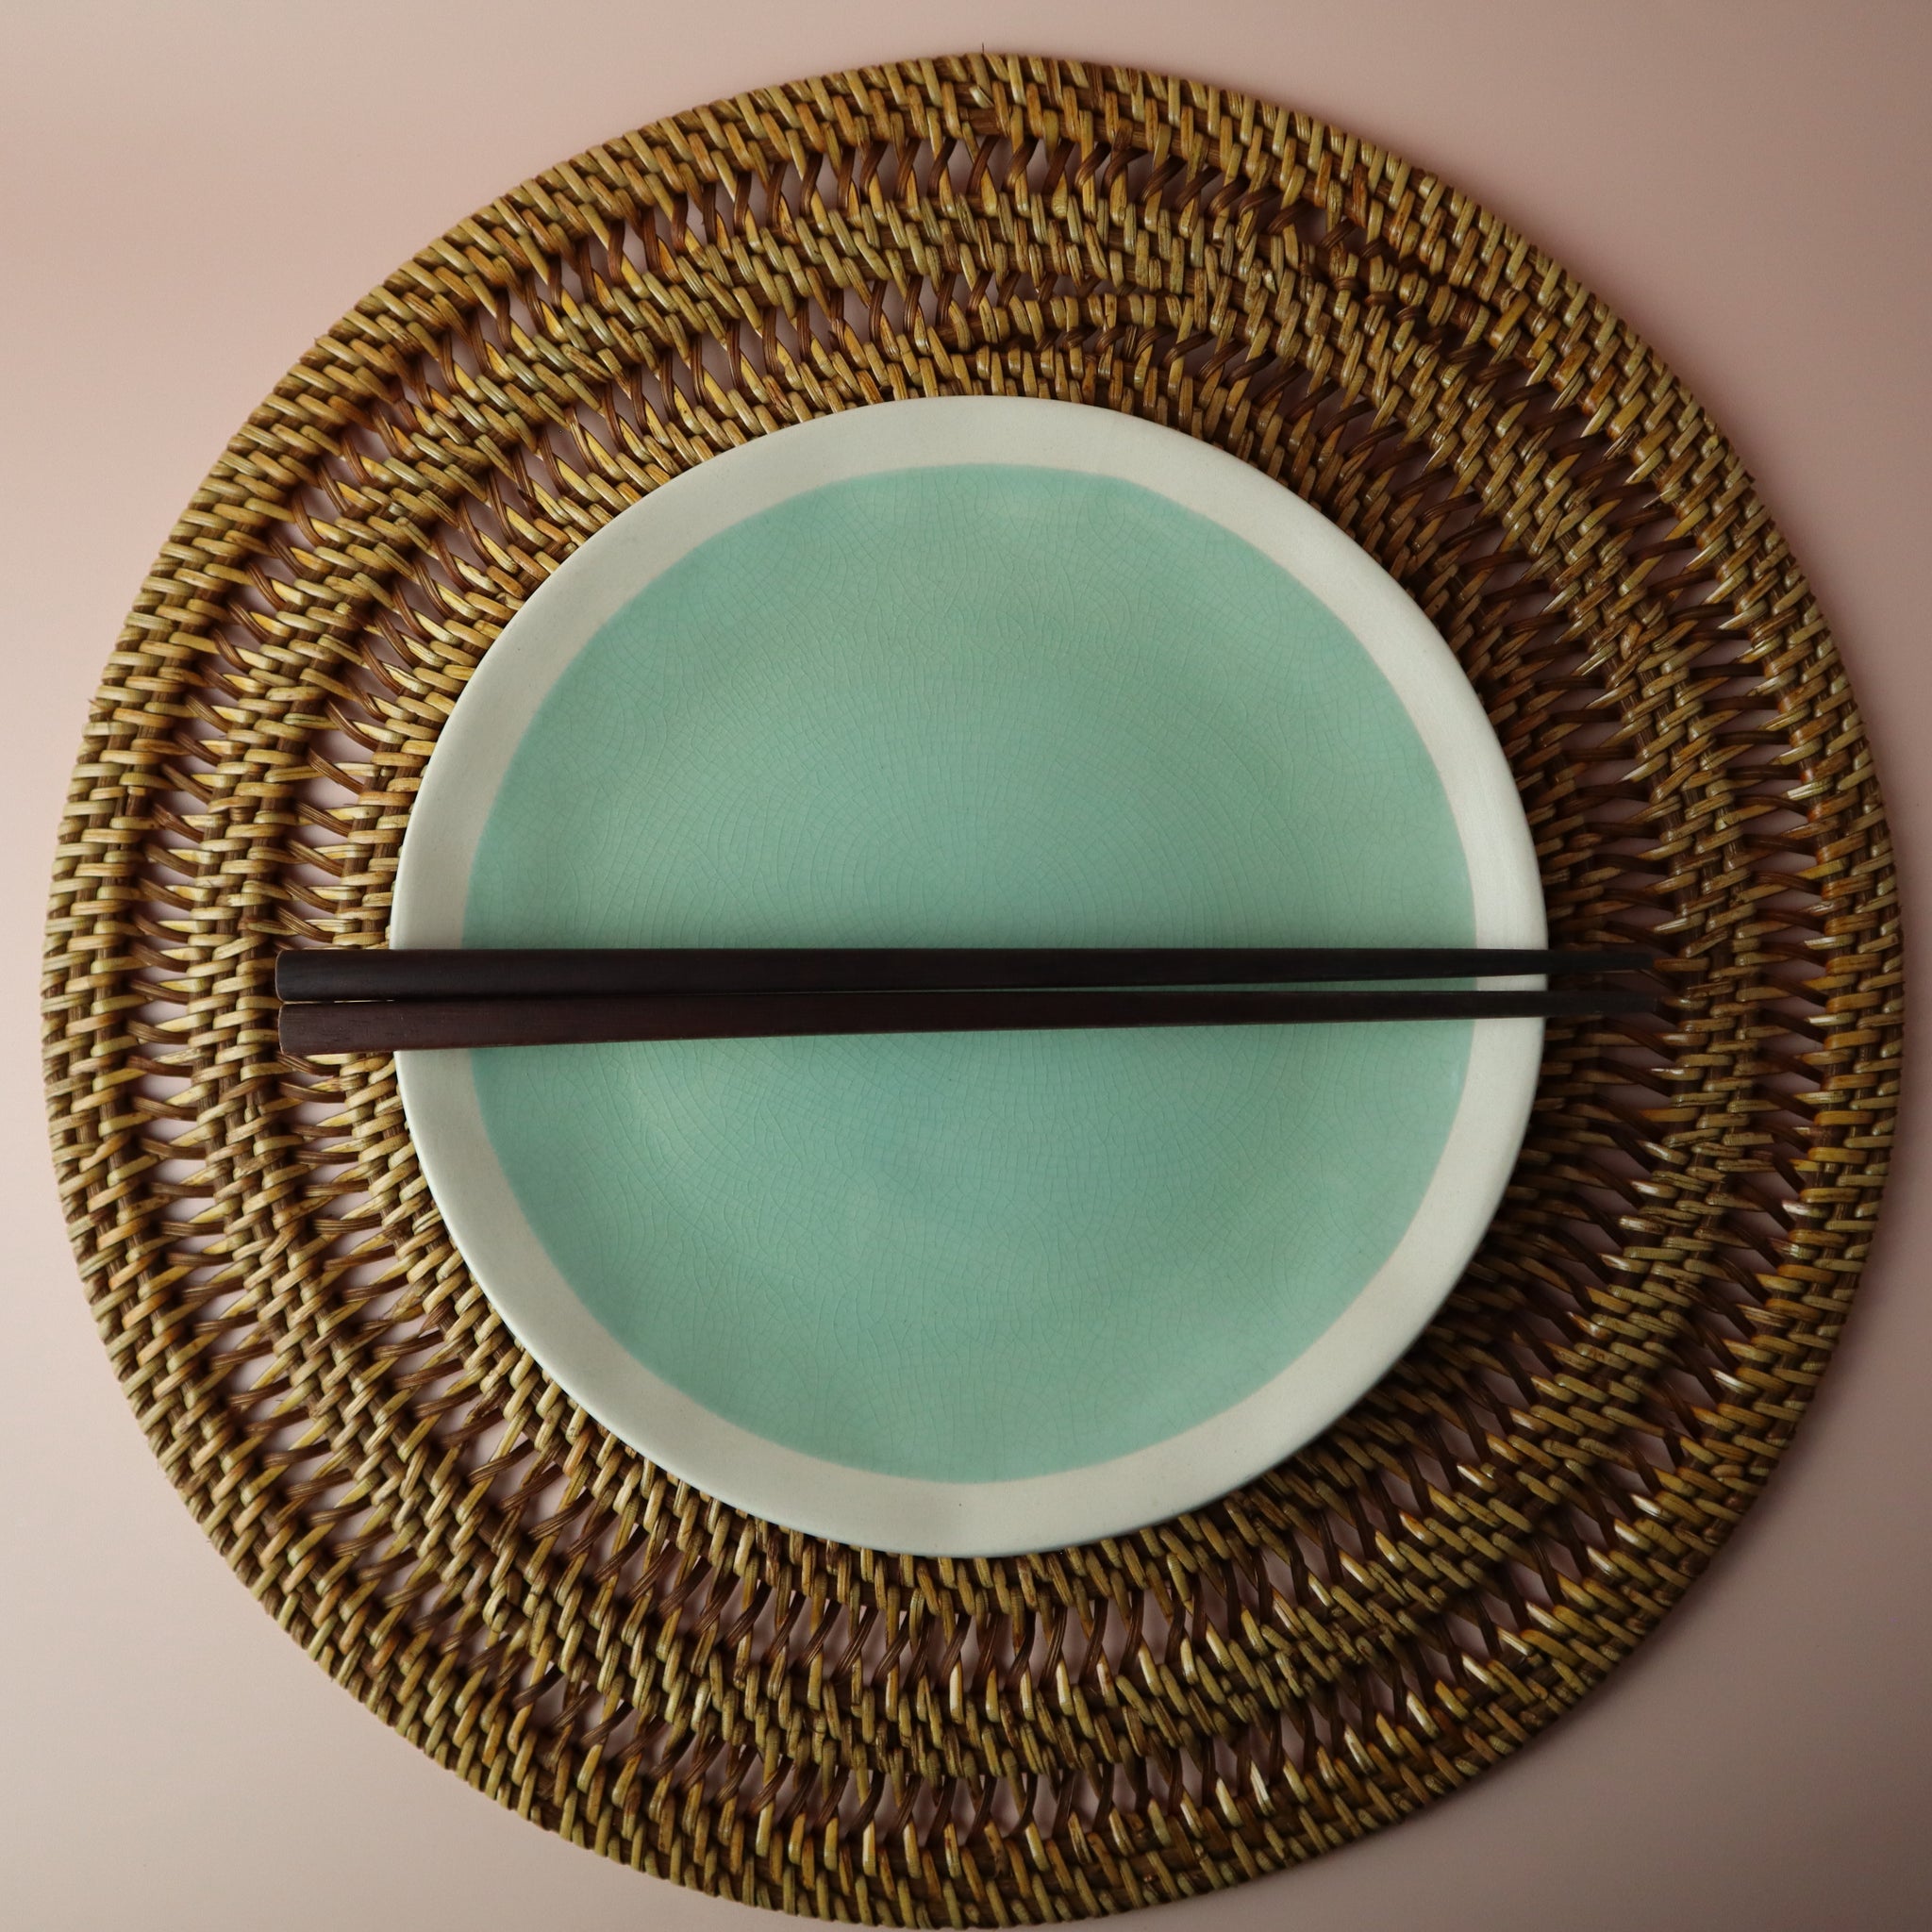 INDONESIAN BROWN SPIRAL RATTAN CHARGER PLATE